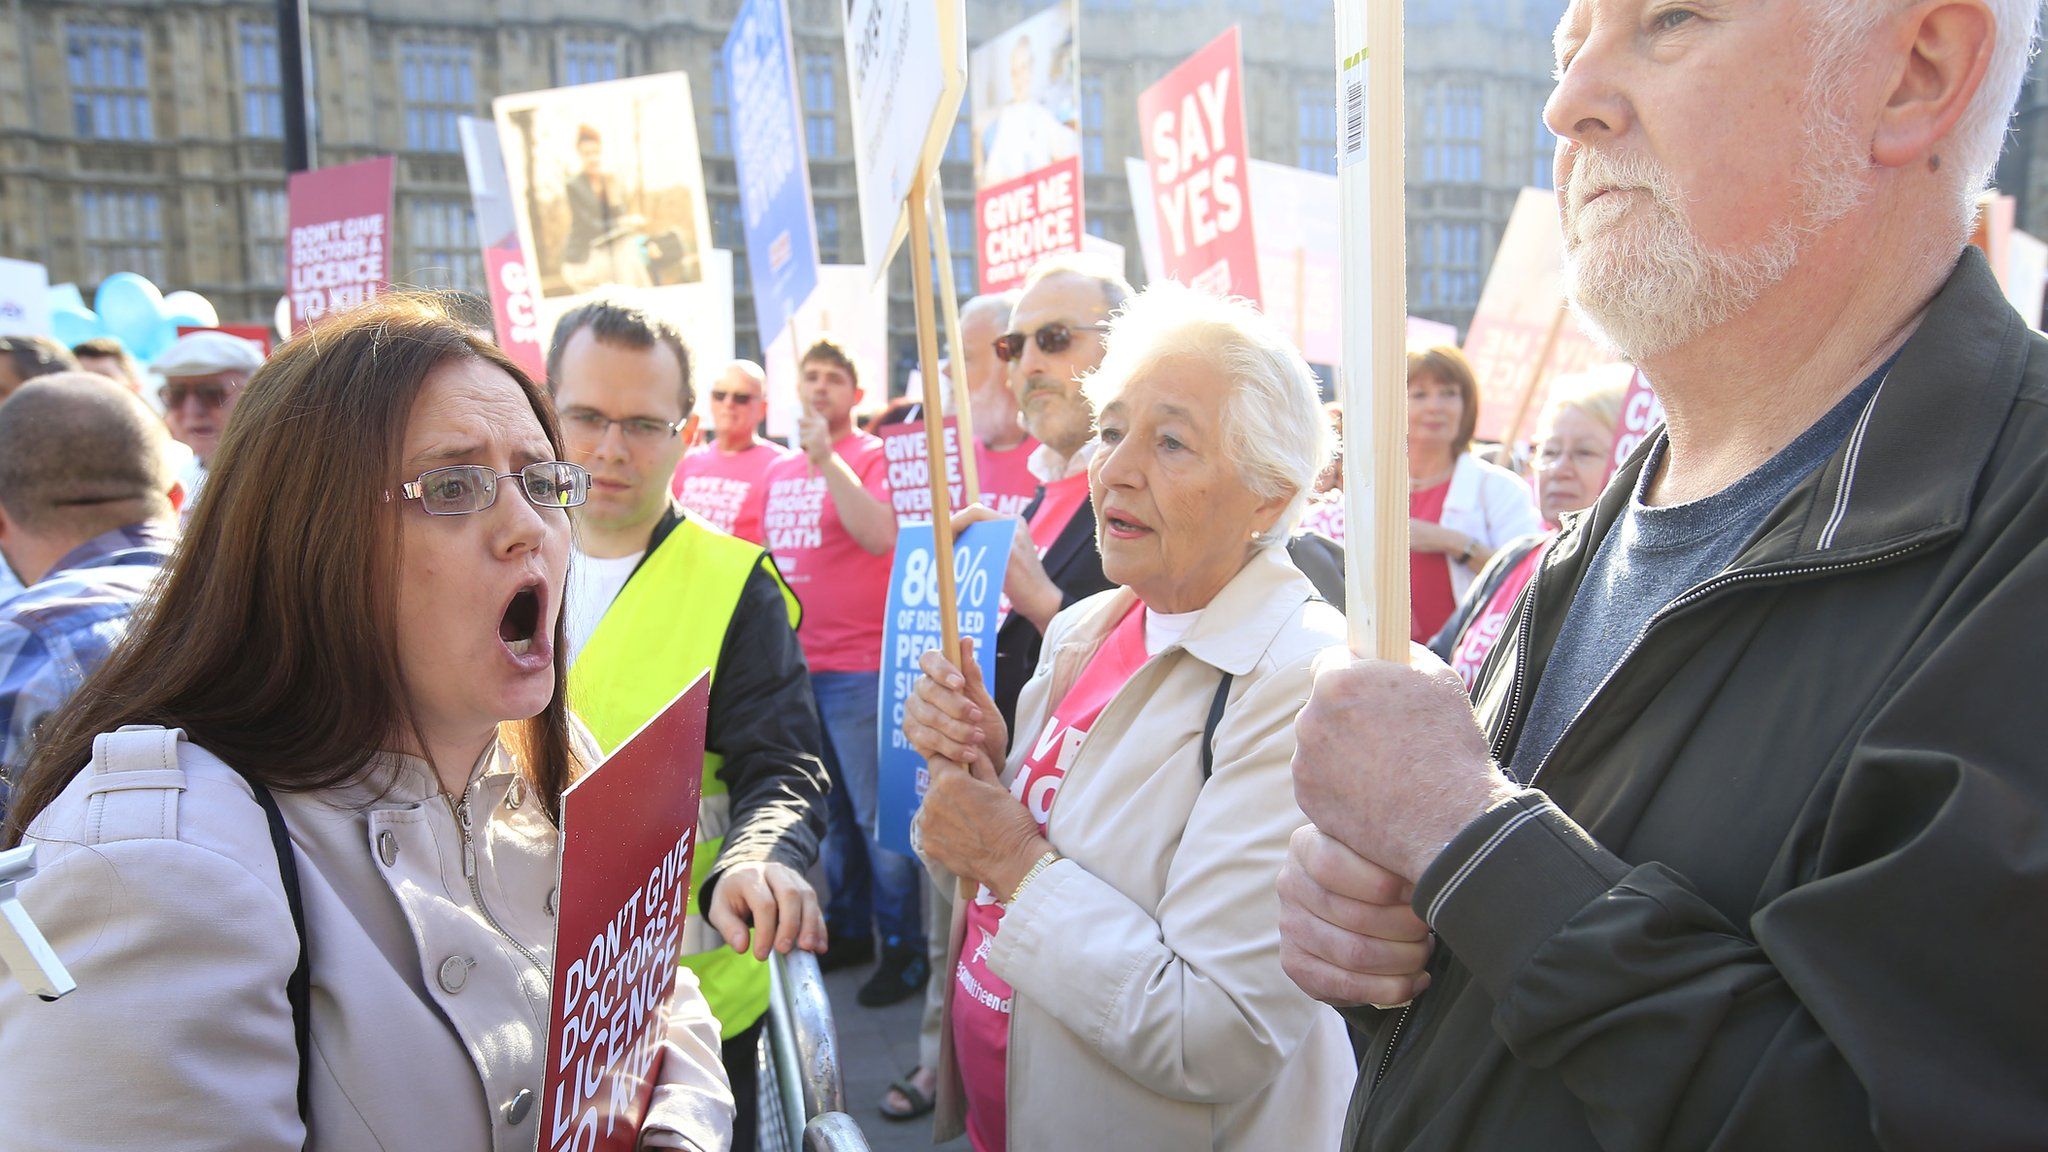 People campaigning for and against the assisted dying bill were outside parliament today